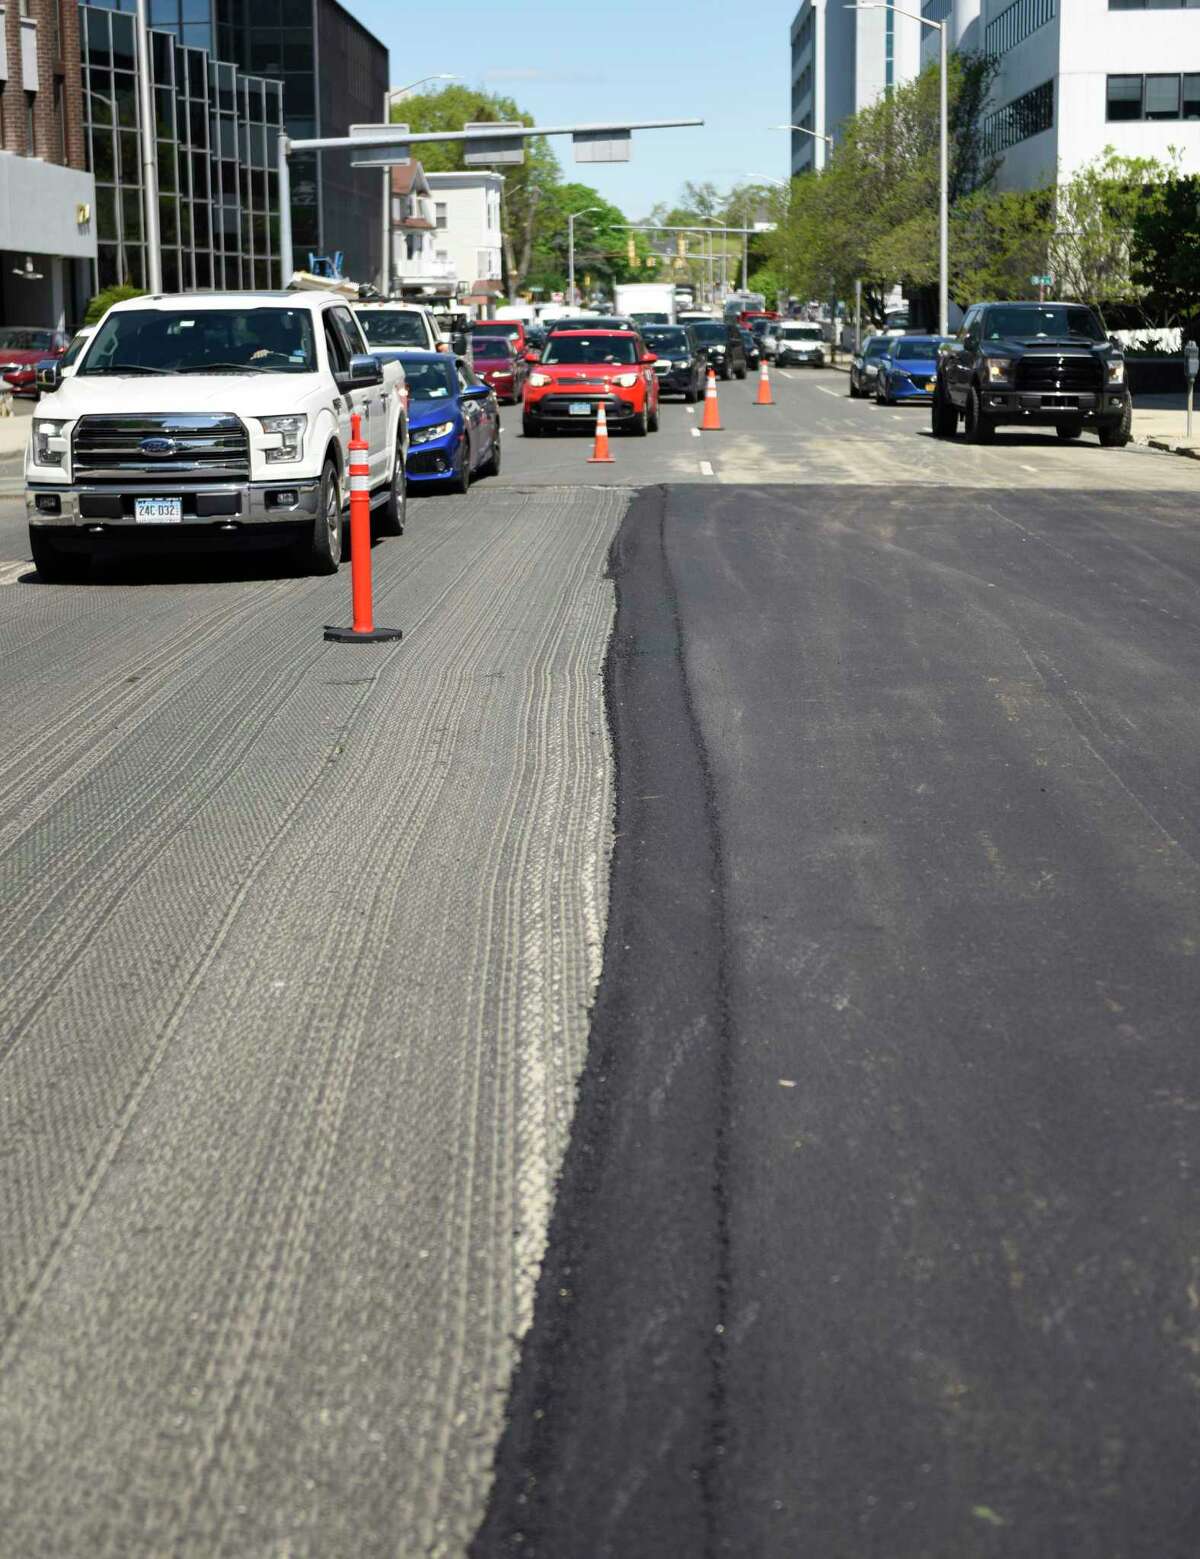 Road paving is expected to begin the week of March 28.